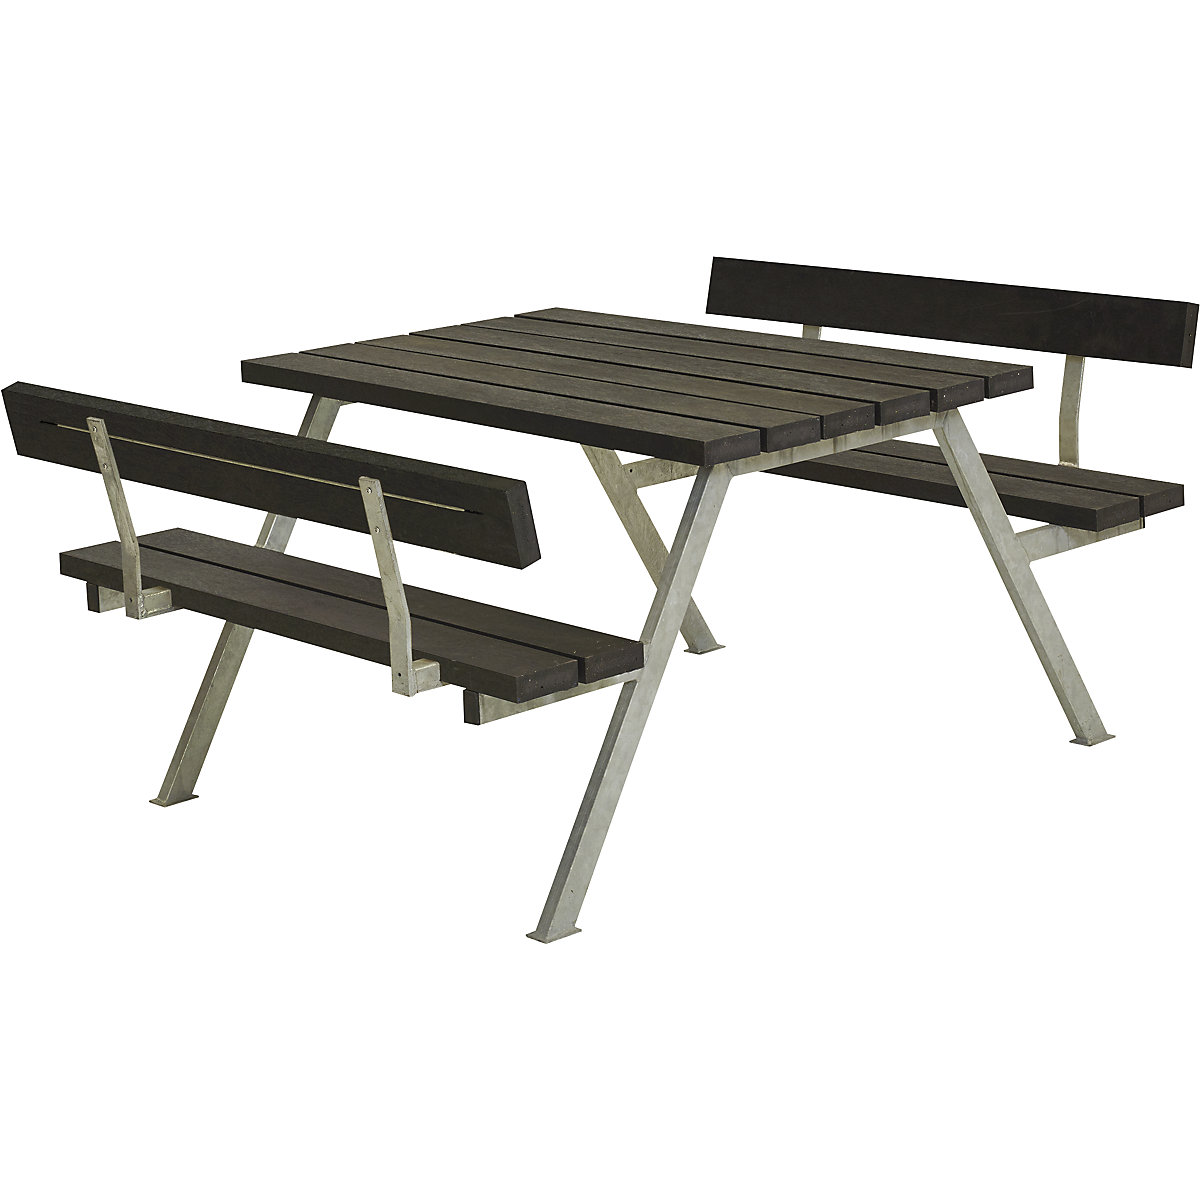 Picnic bench for 4 people